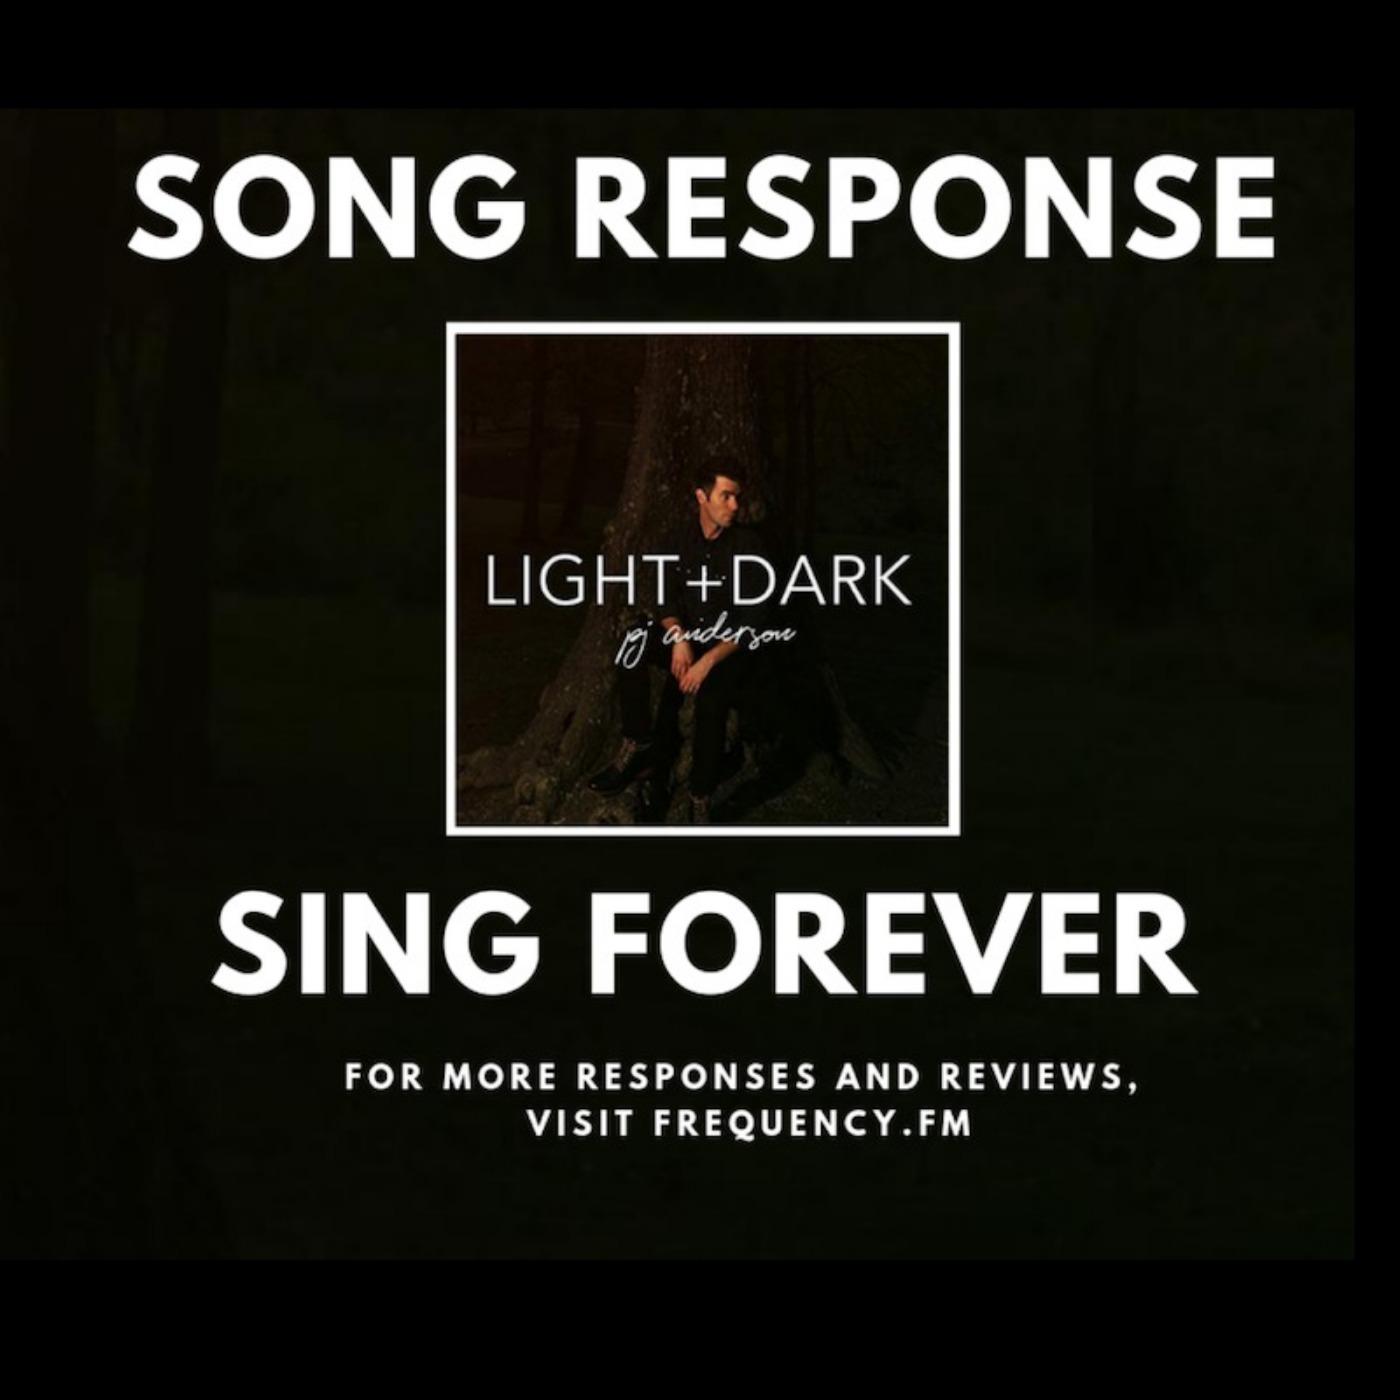 Song Response - Sing Forever by PJ Anderson